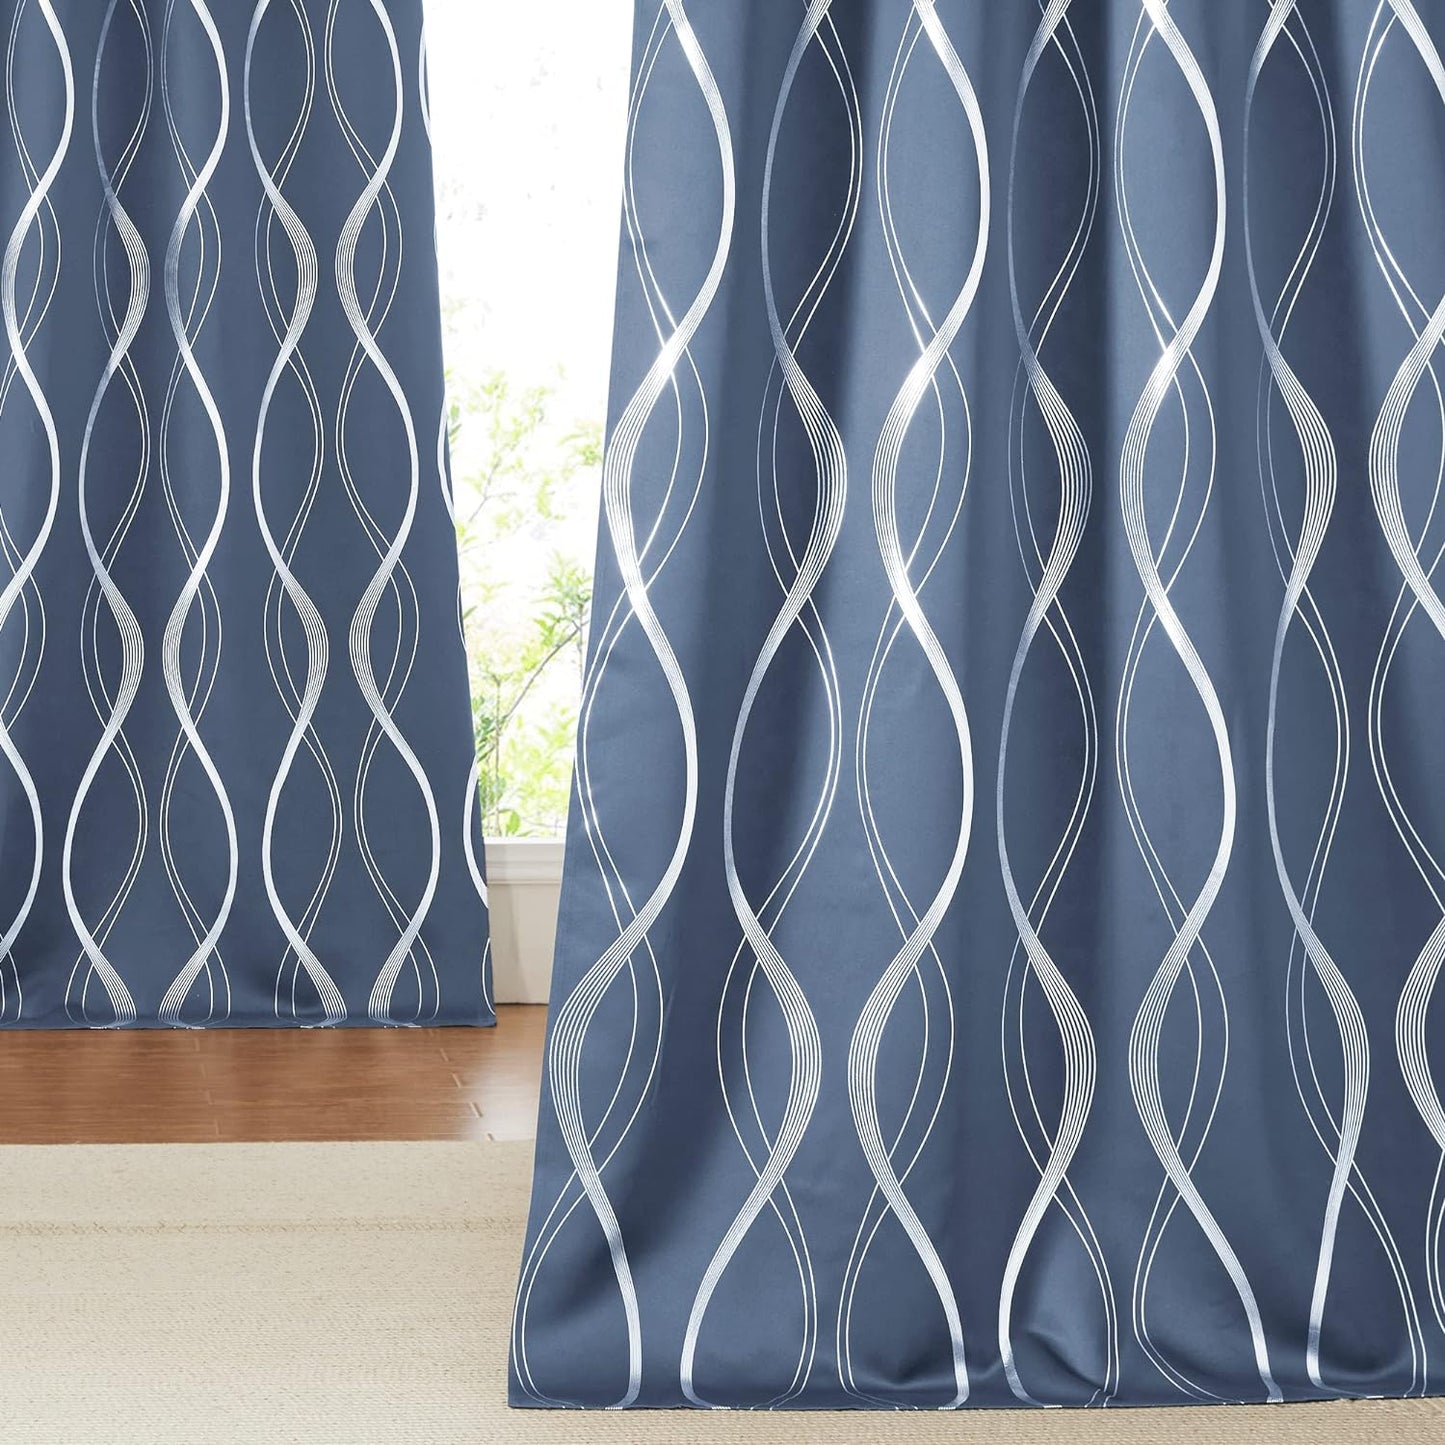 NICETOWN Grey Blackout Curtains 84 Inch Length 2 Panels Set for Bedroom/Living Room, Noise Reducing Thermal Insulated Wave Line Foil Print Drapes for Patio Sliding Glass Door (52 X 84, Gray)  NICETOWN Stone Blue 42"W X 84"L 